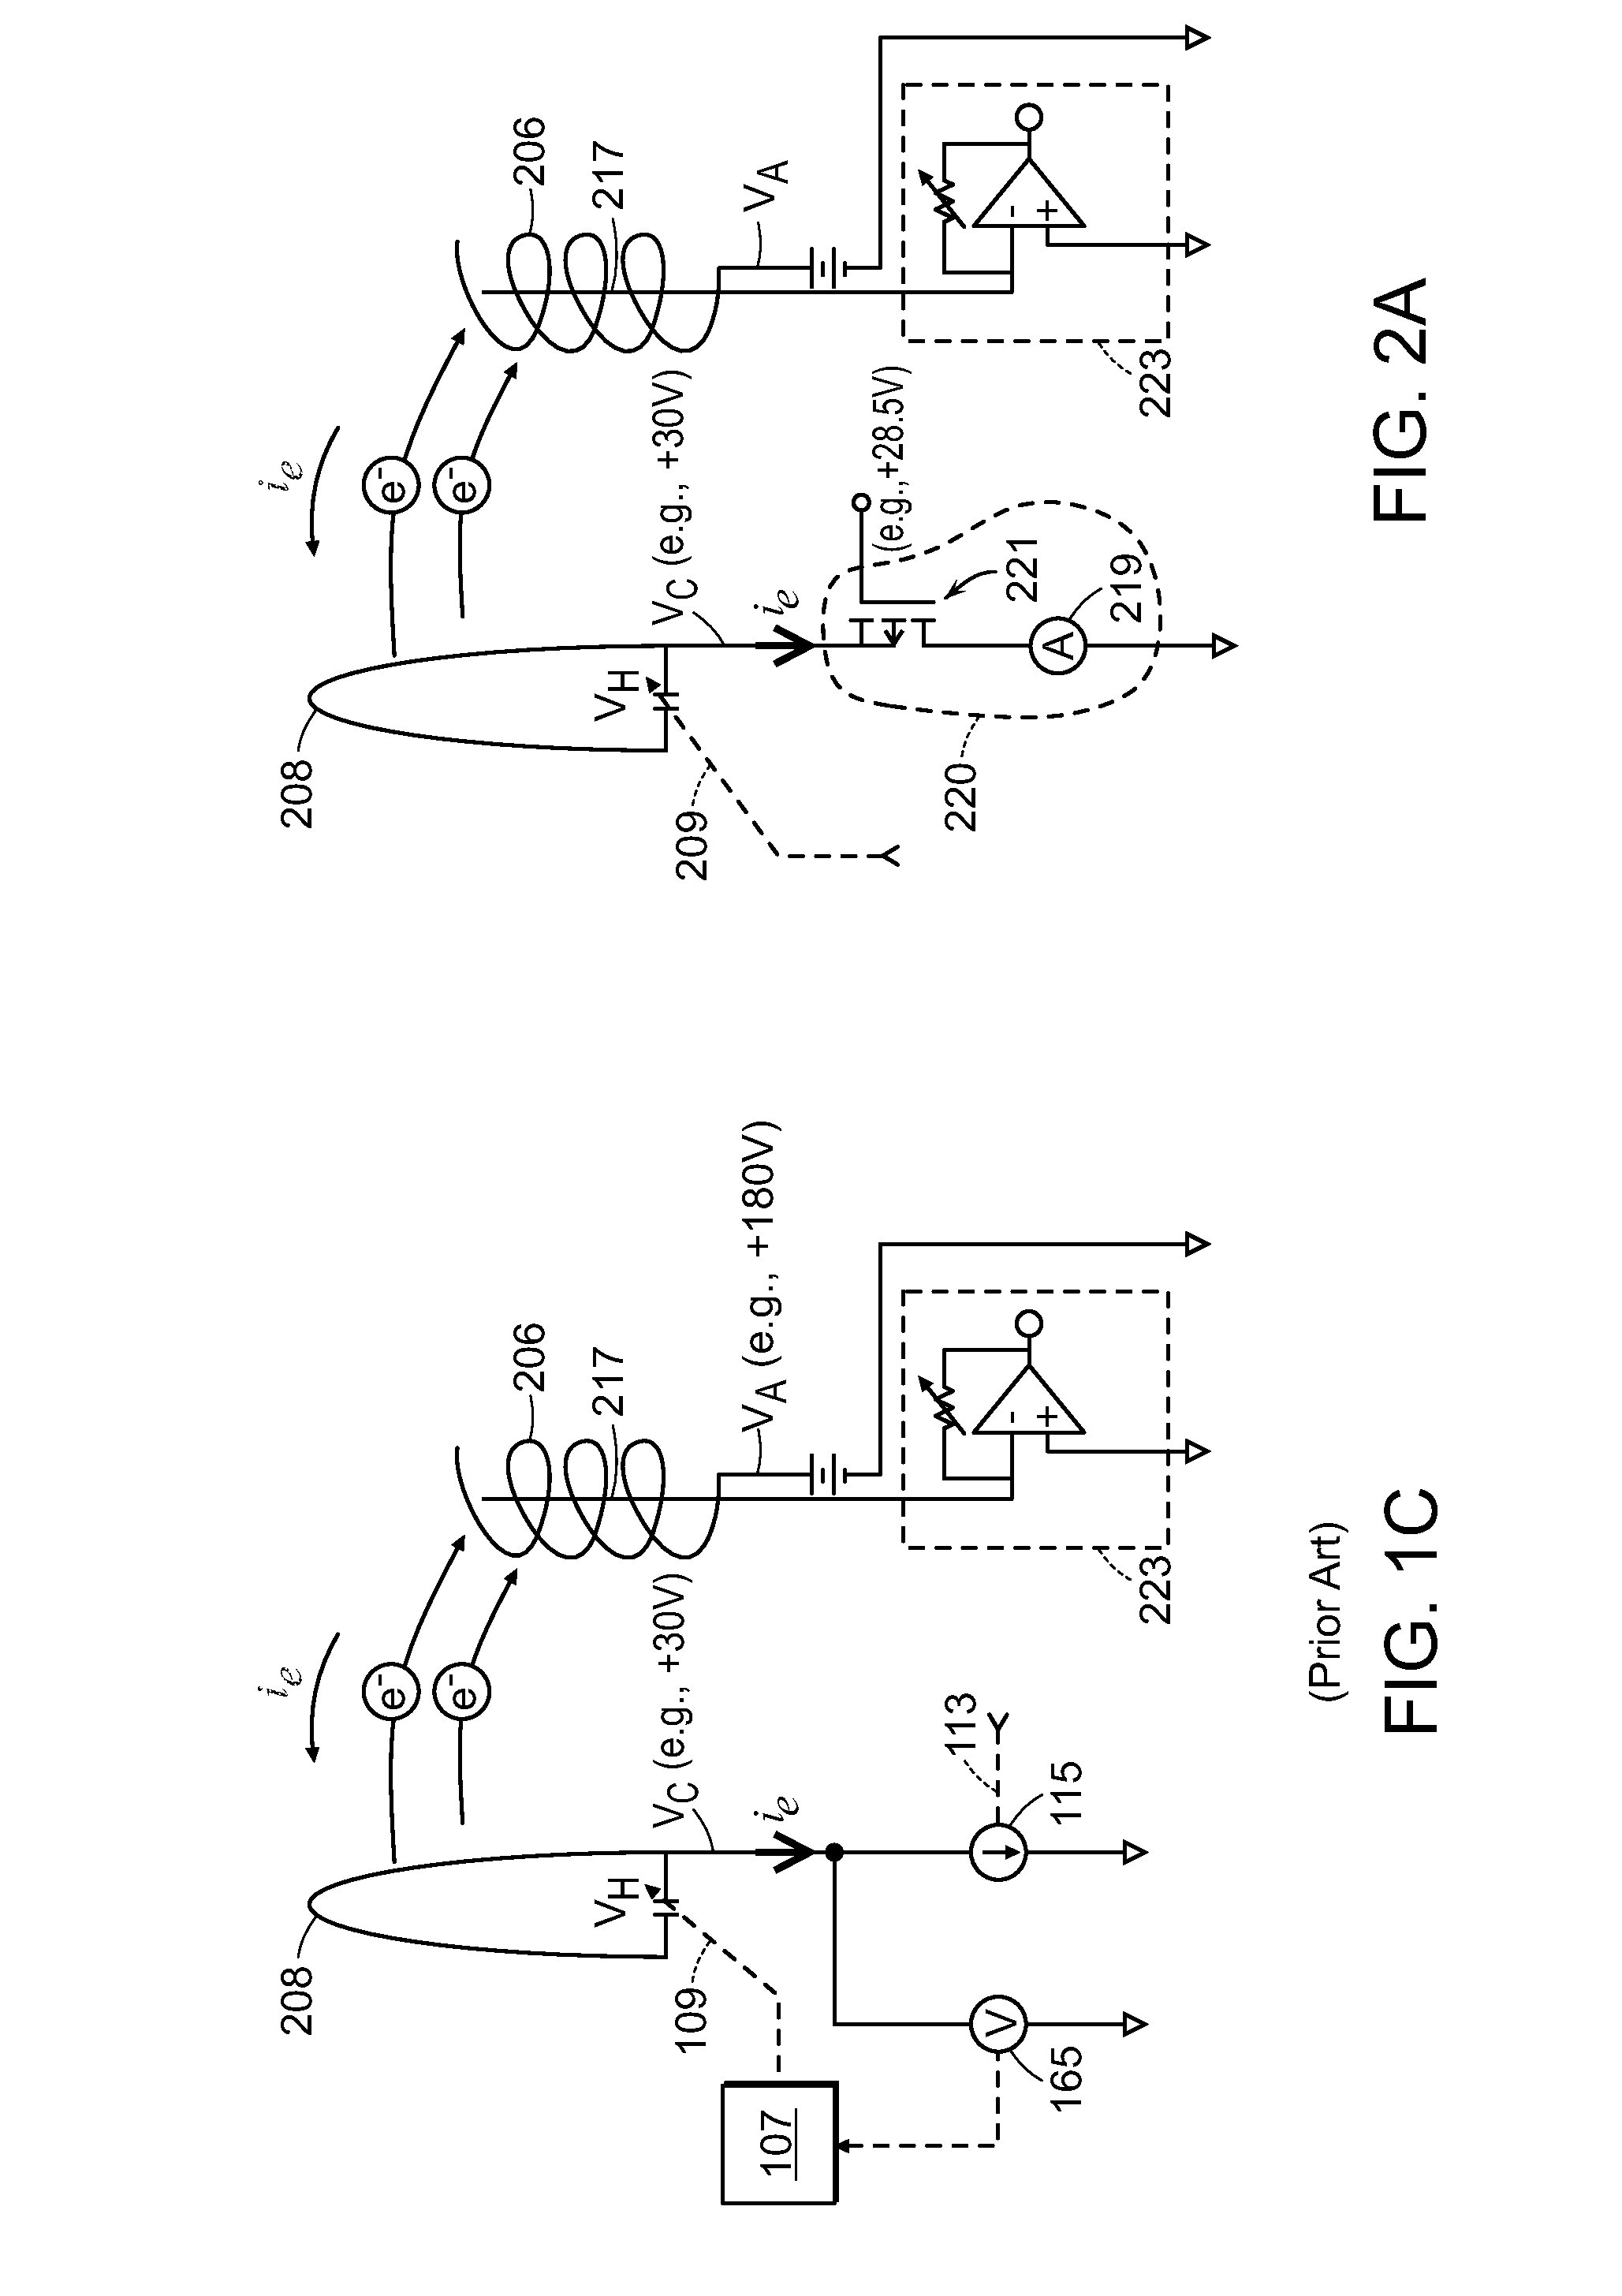 Ionization Pressure Gauge With Bias Voltage And Emission Current Control And Measurement